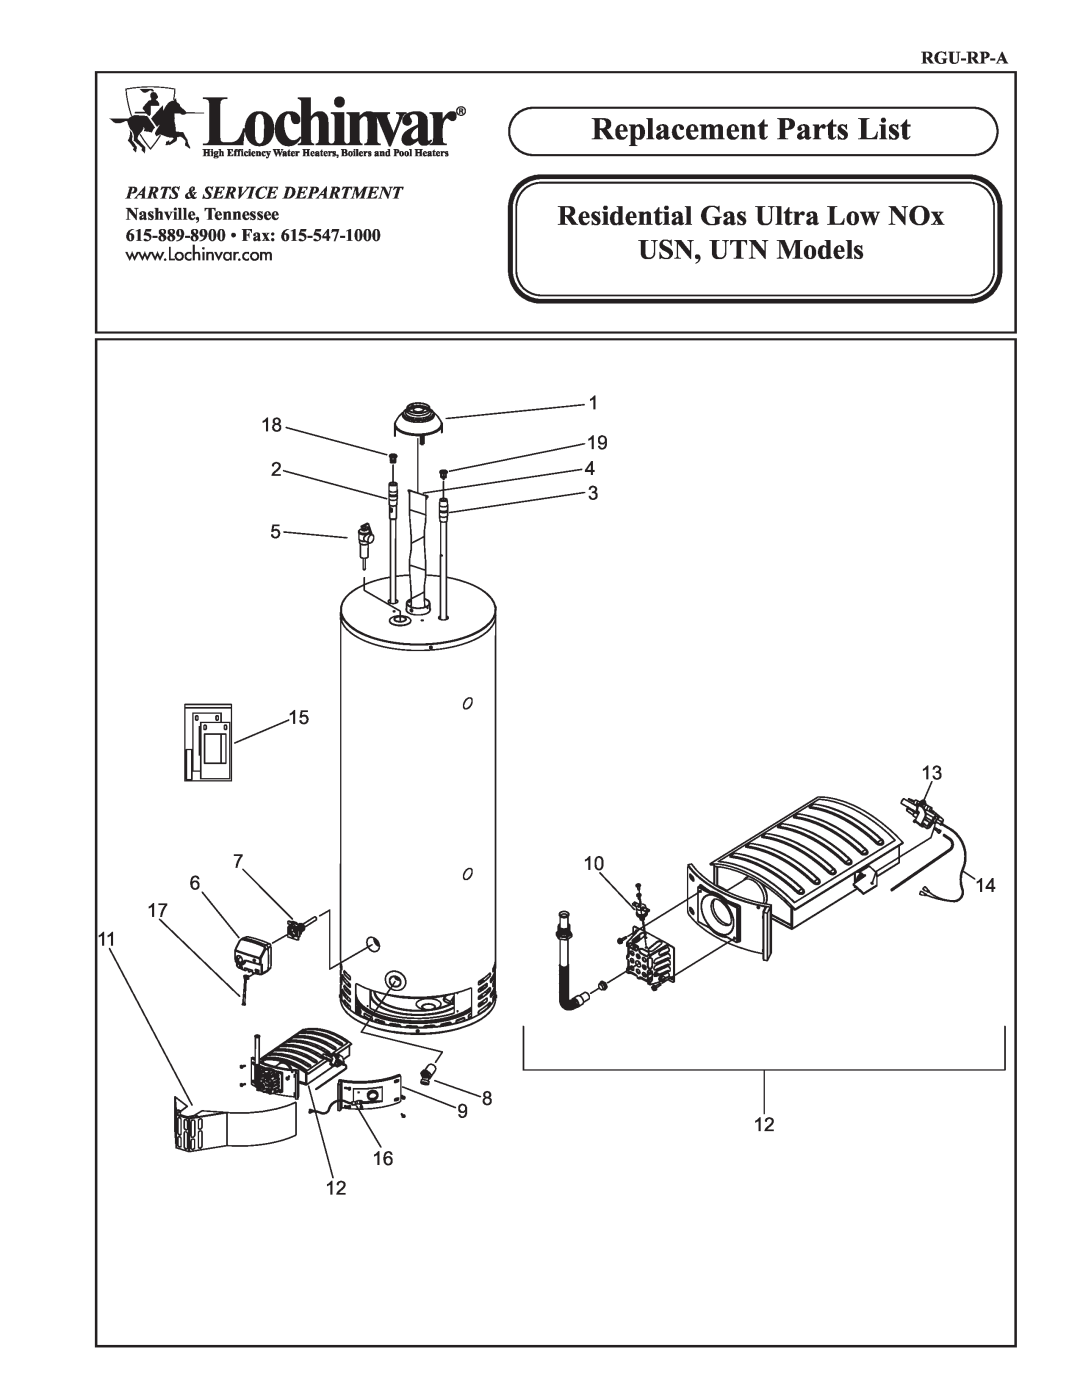 Lochinvar manual Replacement Parts List, Residential Gas Ultra Low NOx USN, UTN Models 